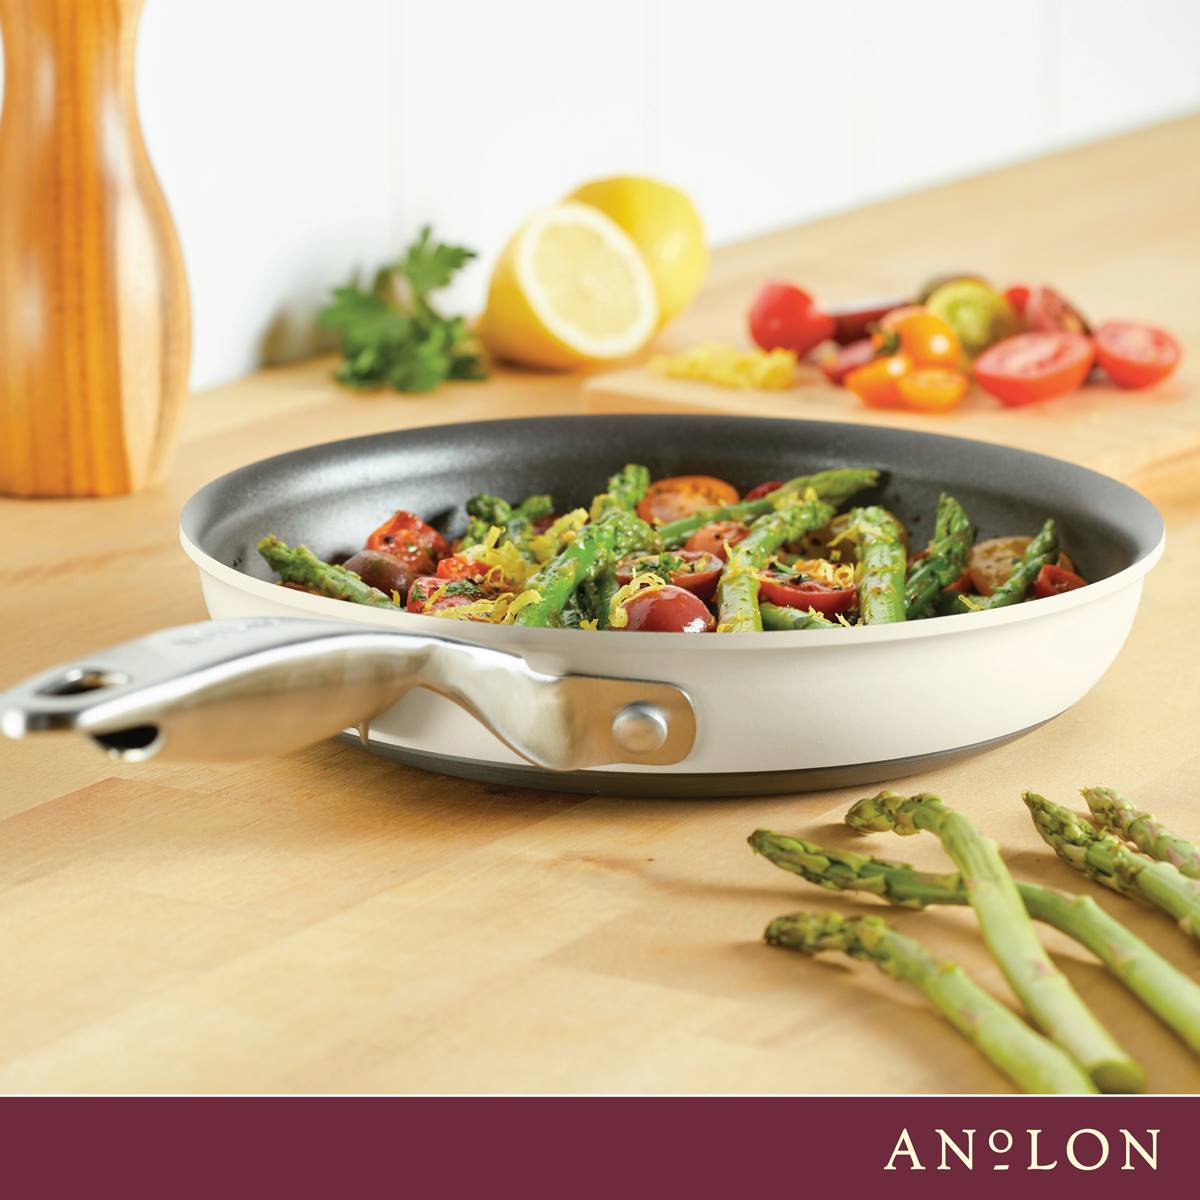 Anolon(R) Achieve Hard Anodized Nonstick 8.25in. Frying Pan